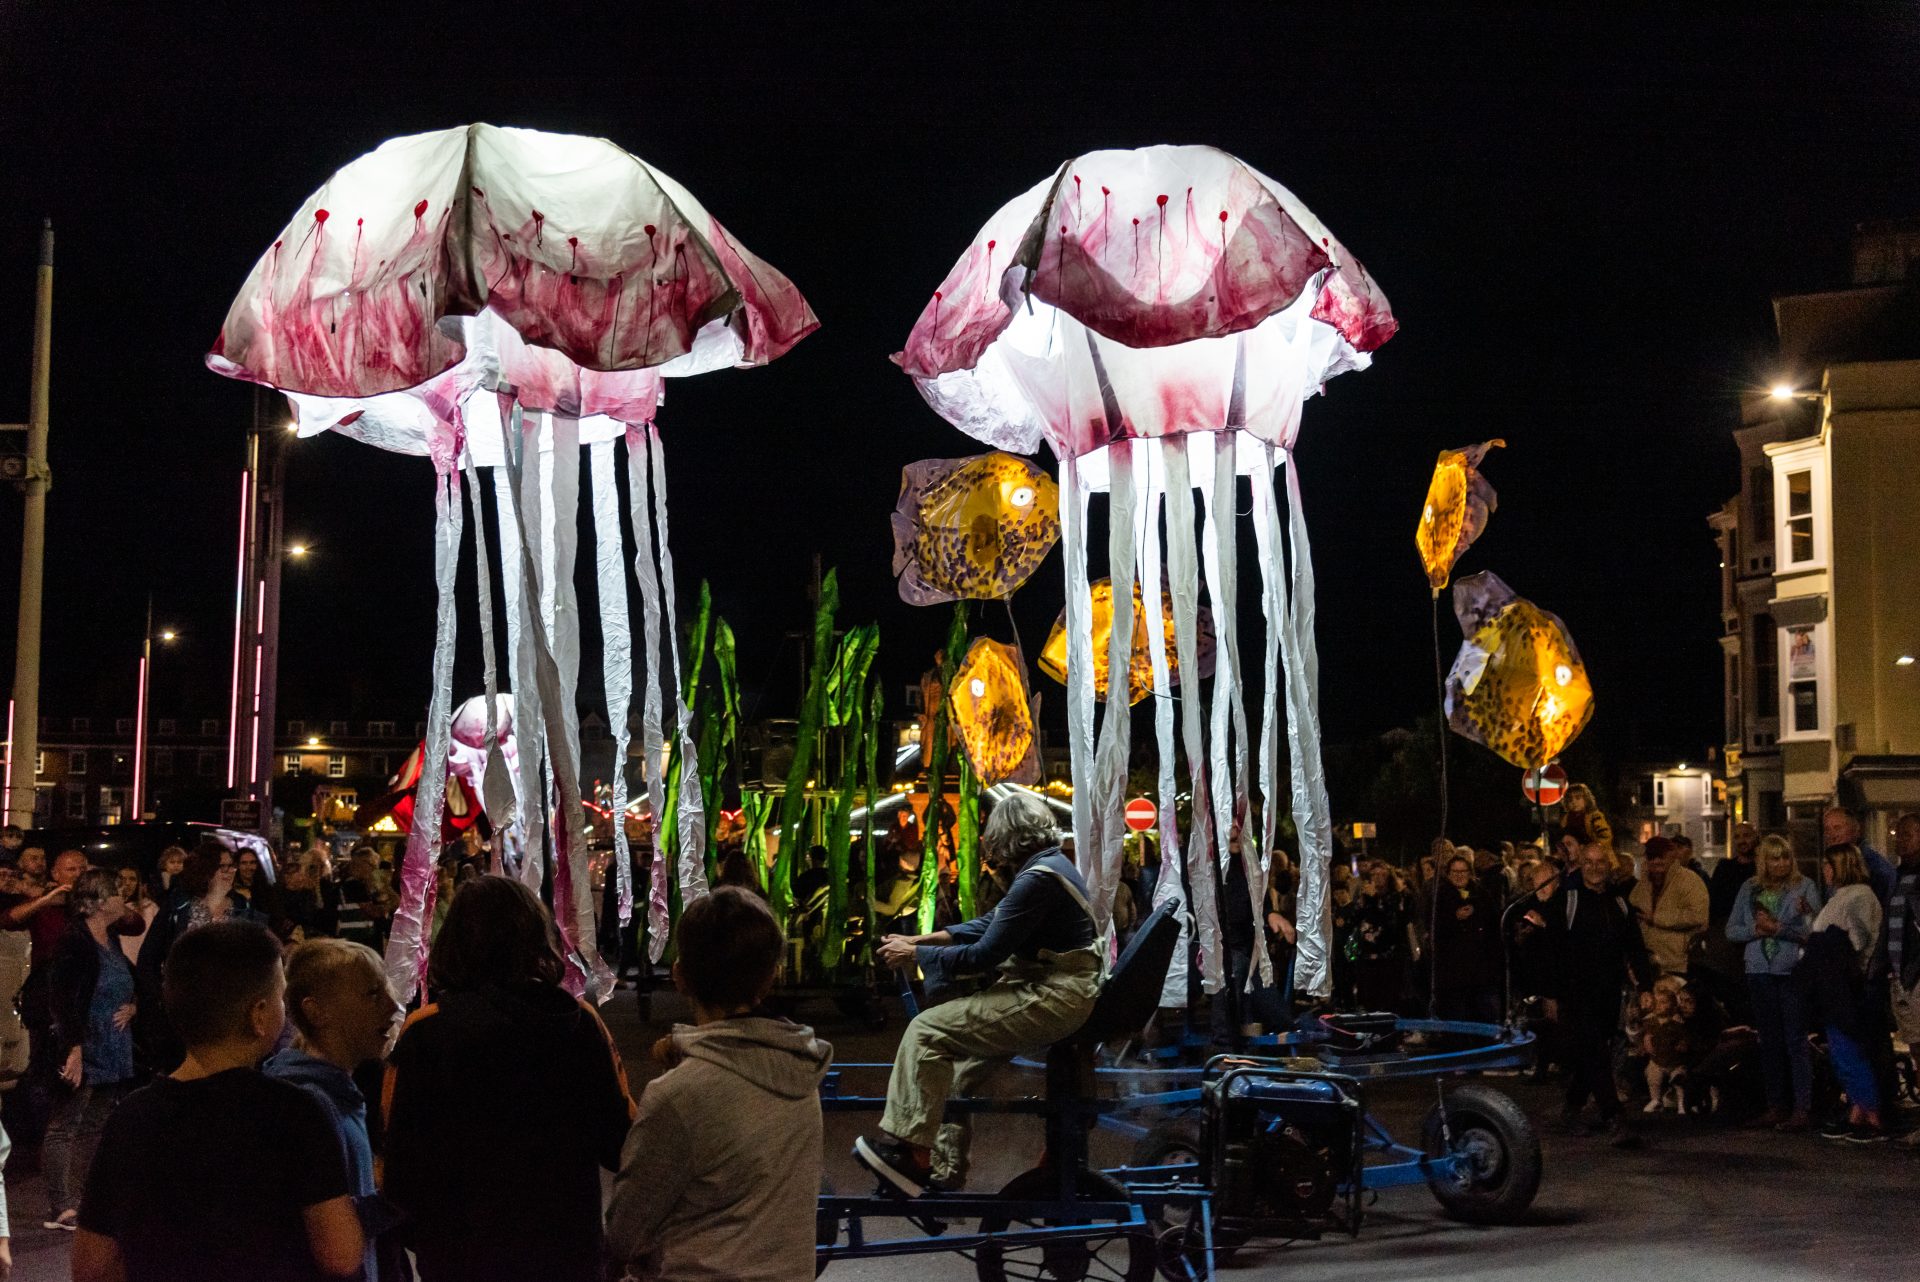 Nighttime scene of illuminated sea creatures propelled by giant pedal-powered frames